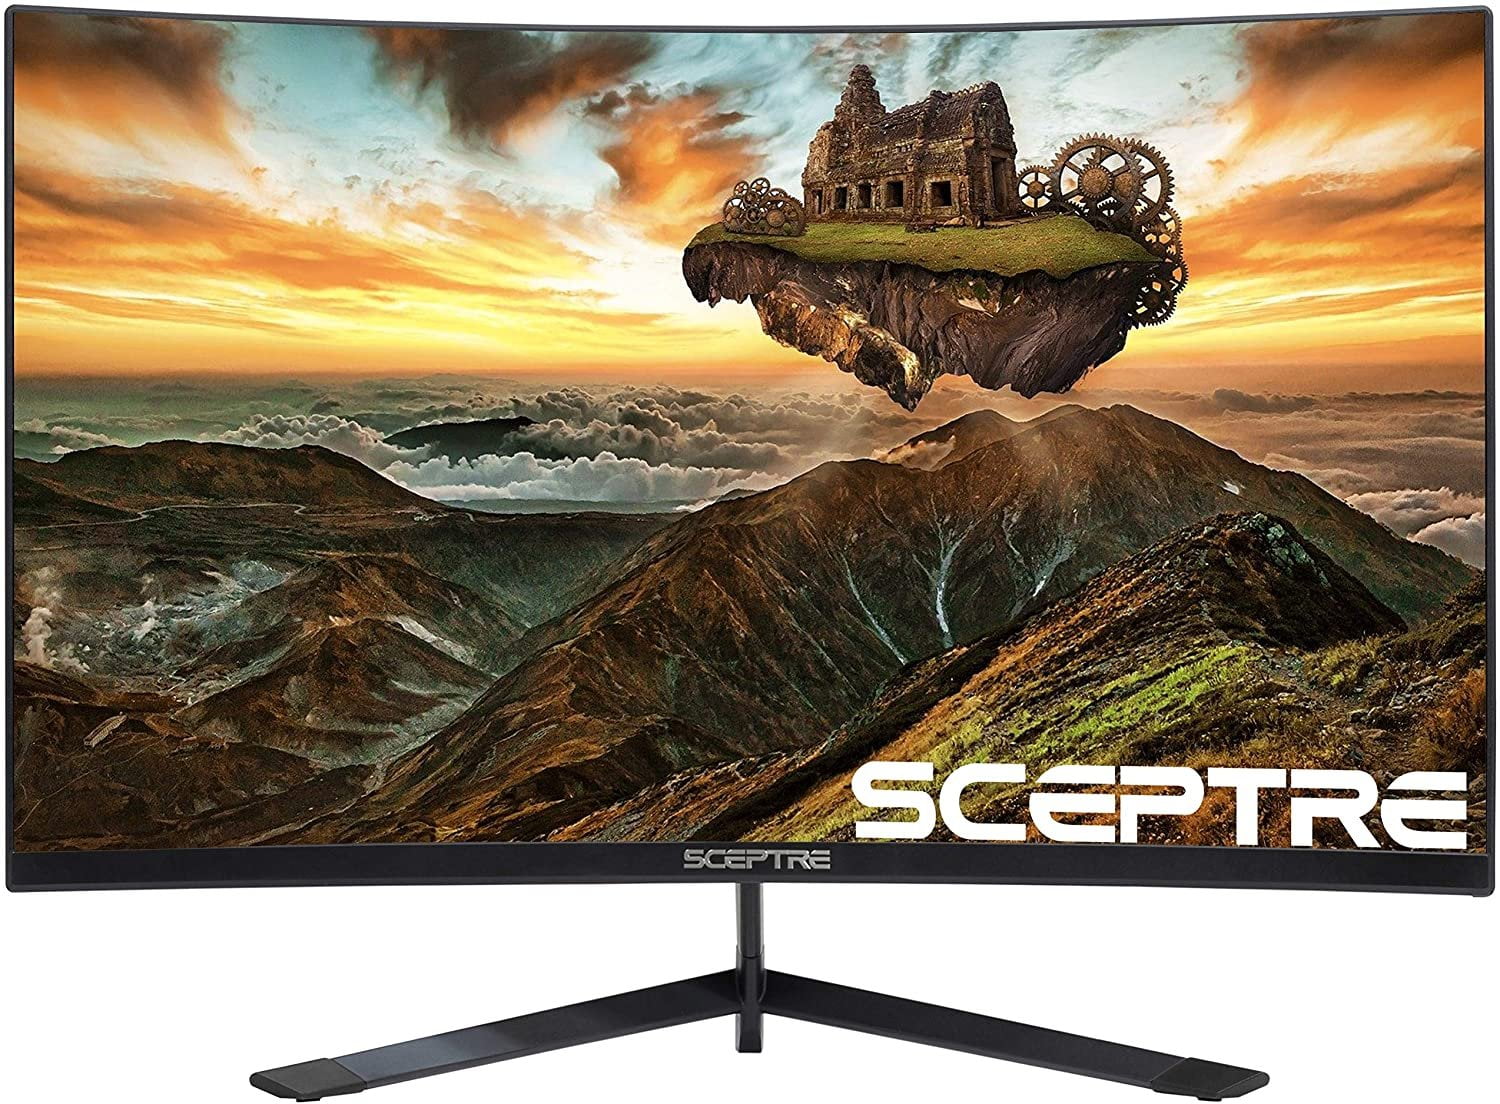 Photo 1 of SCREEN CRACKED, Sceptre Curved 27 Gaming Monitor up to 185Hz DisplayPort 144Hz HDMI Edge-Less AMD FreeSync Premium, Build-in Speakers Machine Black 2020 (C275B-1858RN)